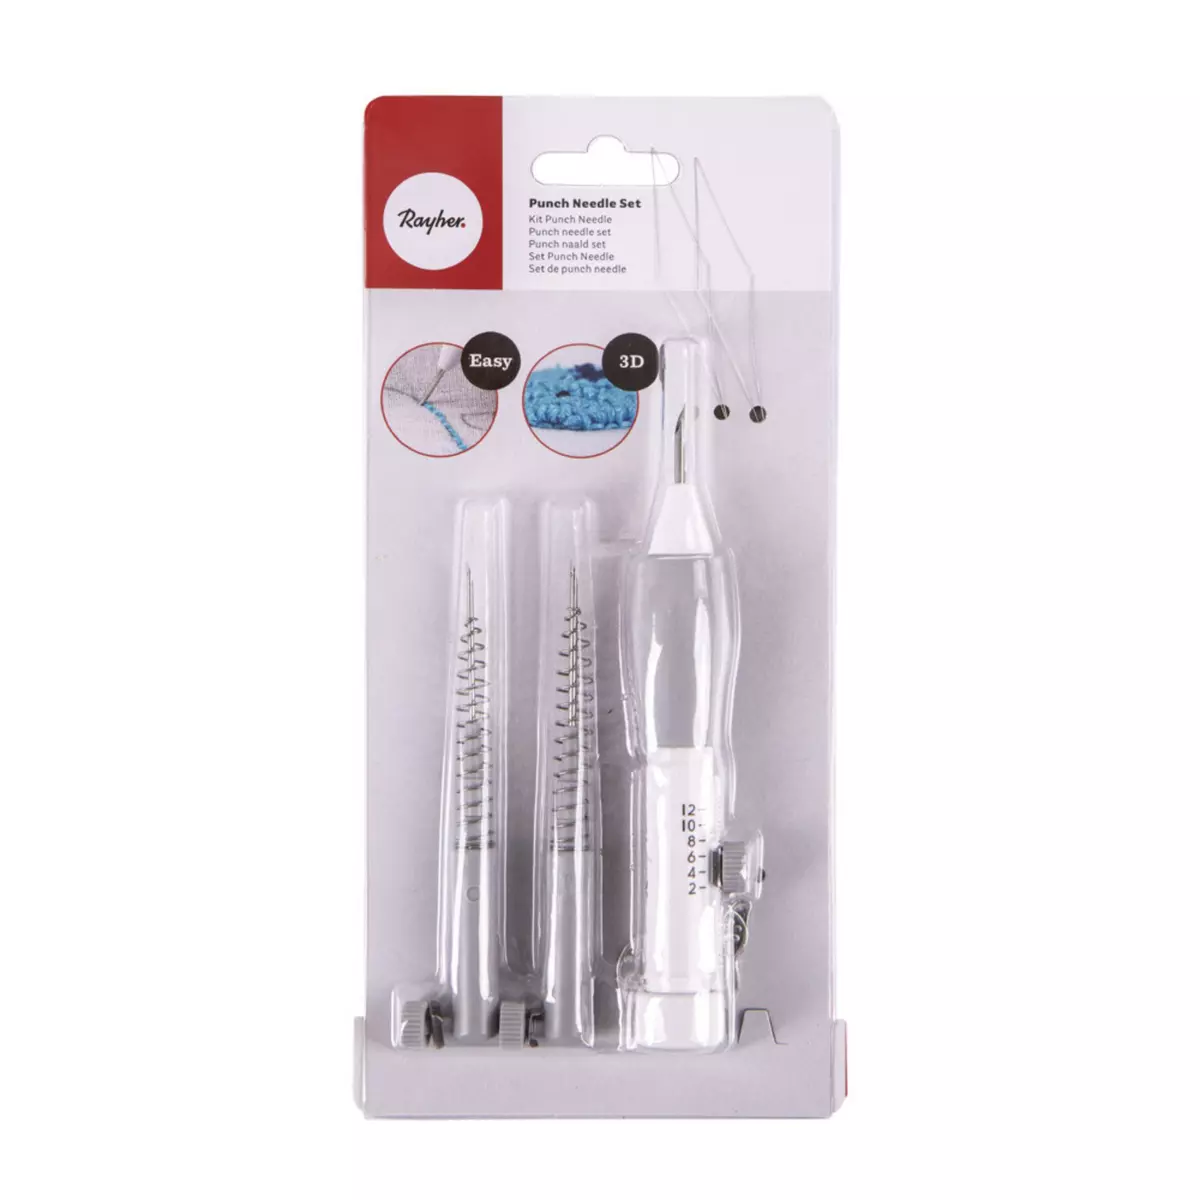 Rayher Set d'outils à punch needle - 5 pièces